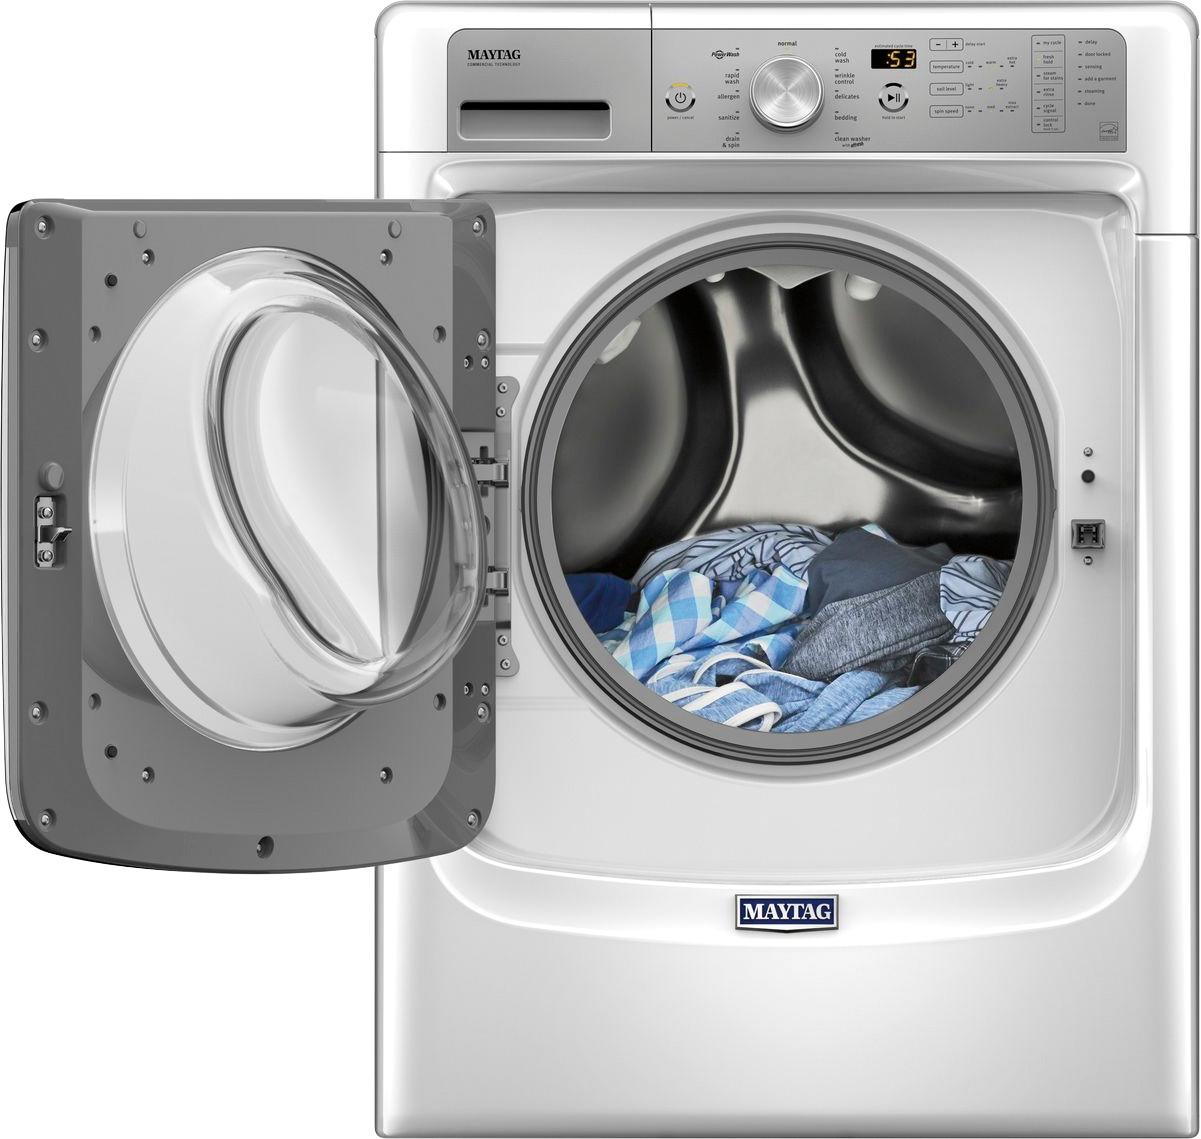 Best Buy Maytag 4.5 cu. ft. 11Cycle Front Loading Washer White MHW5500FW